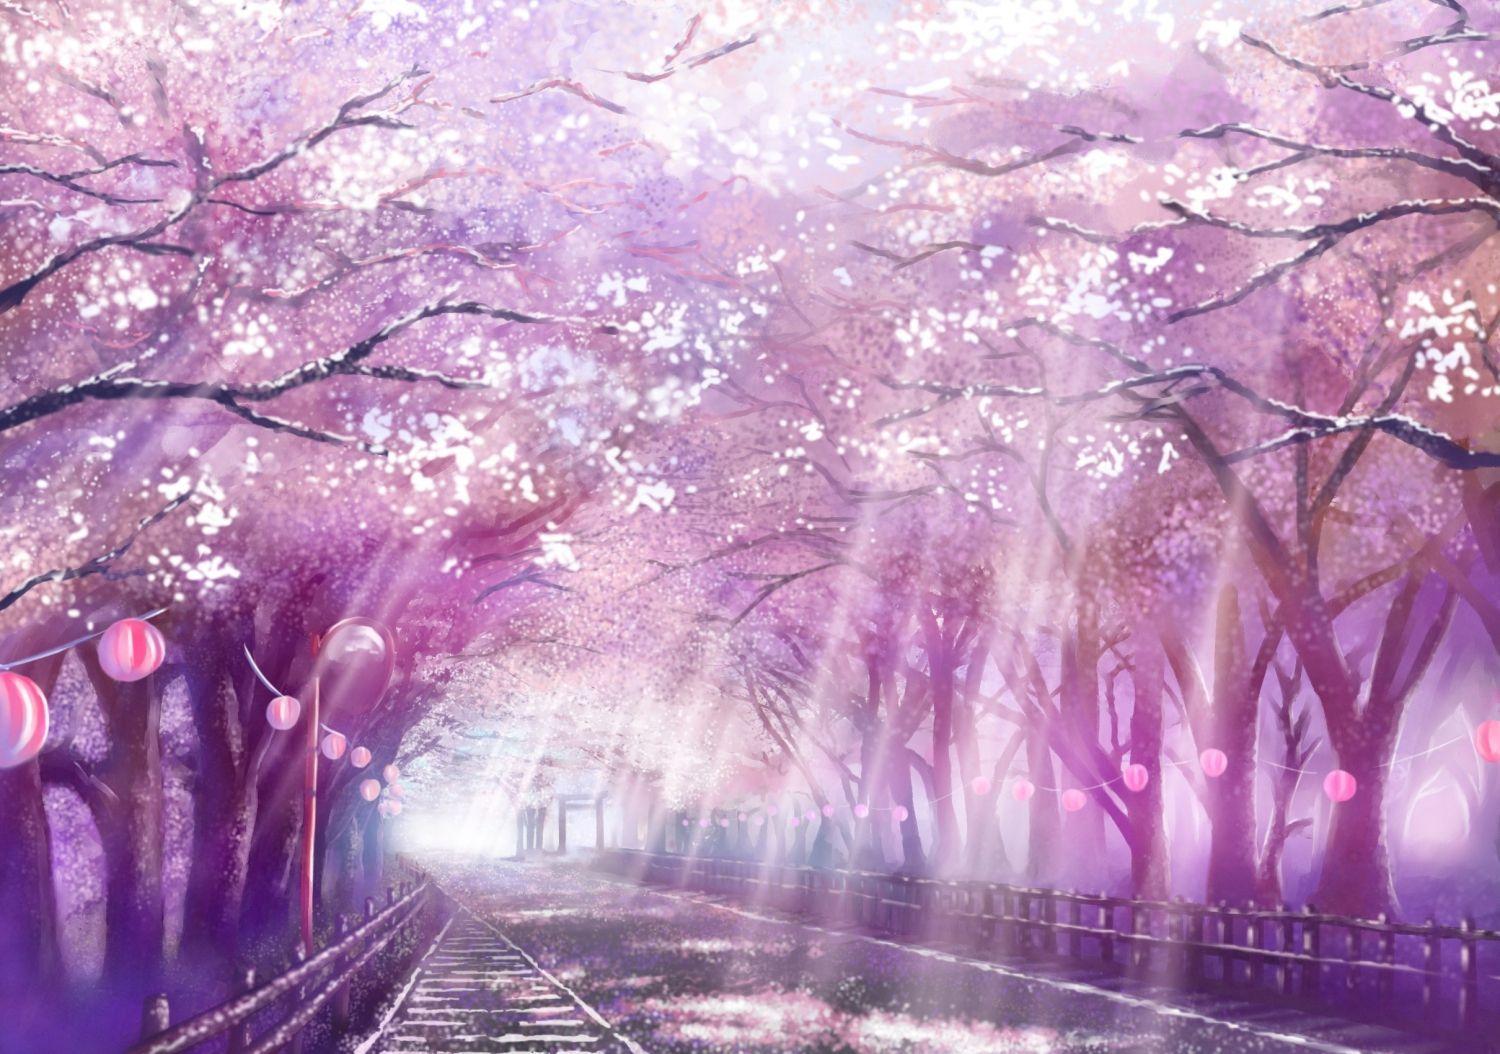 Cherry Blossoms Anime Scenery Wallpaper Free Cherry Blossoms Anime Scenery Background